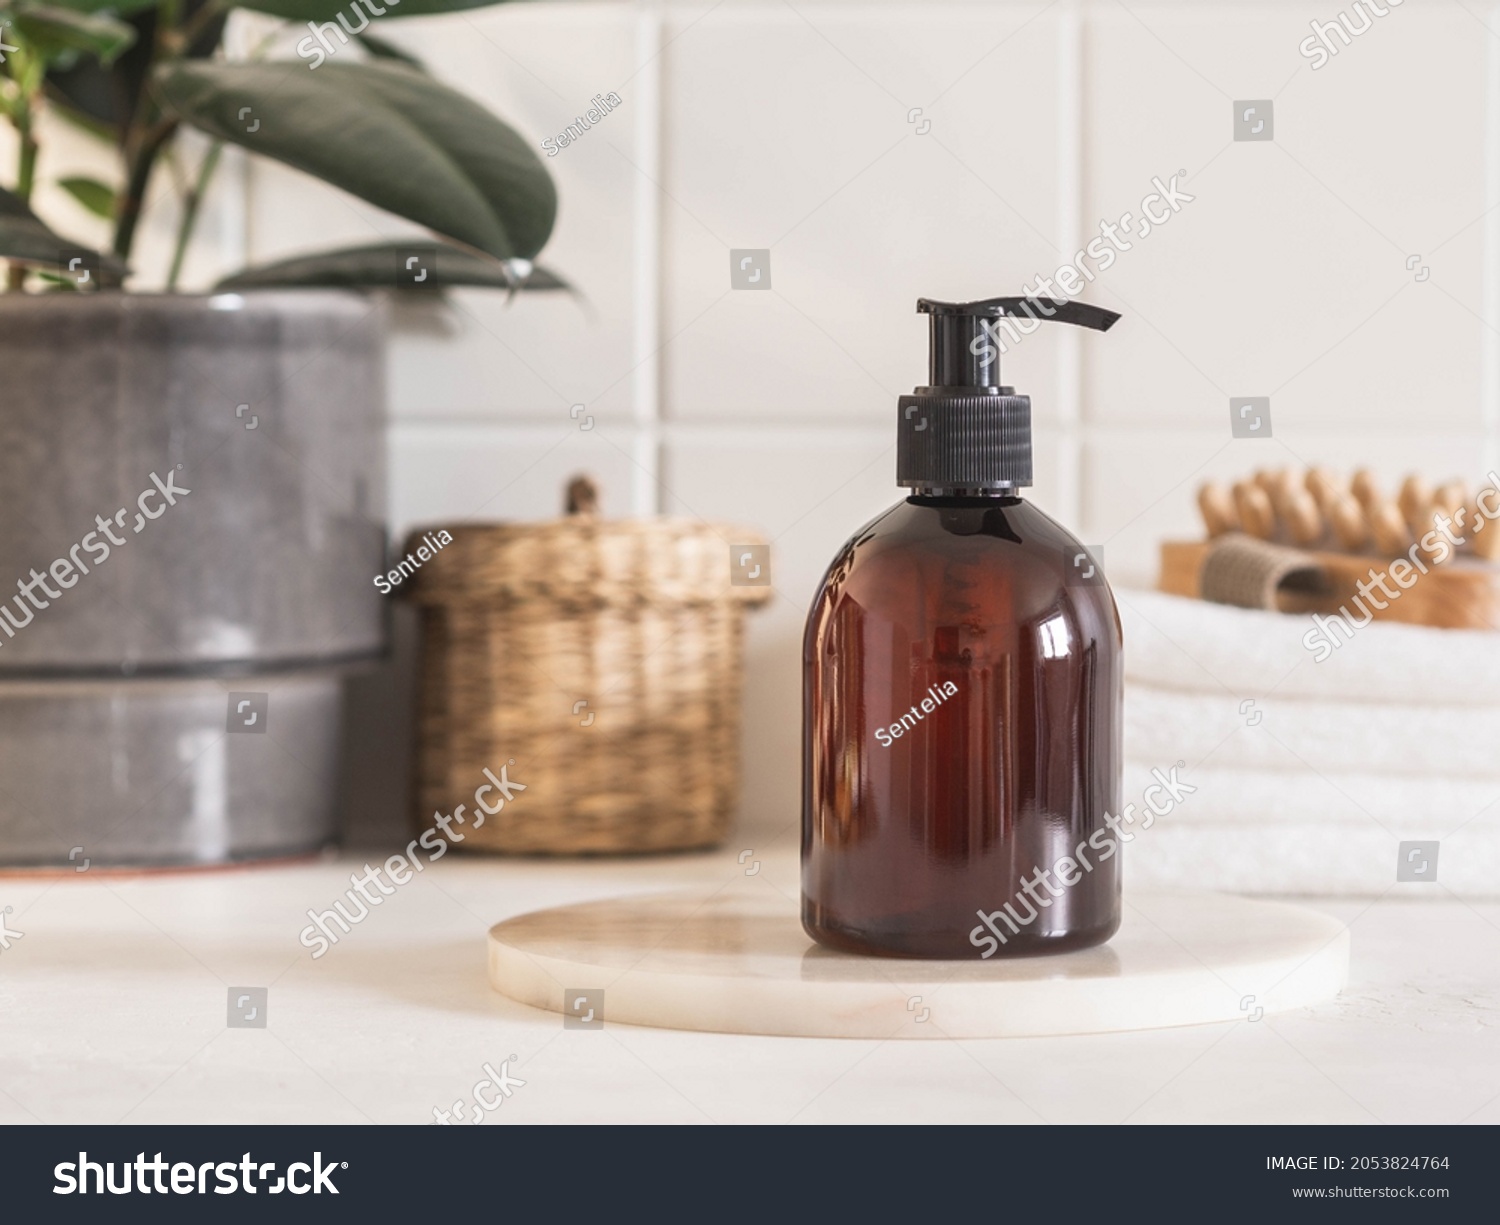 Brown bottle mockup for bathing products in bathroom, spa shampoo, shower gel, liquid soap on marble podium and various accessories front view. #2053824764